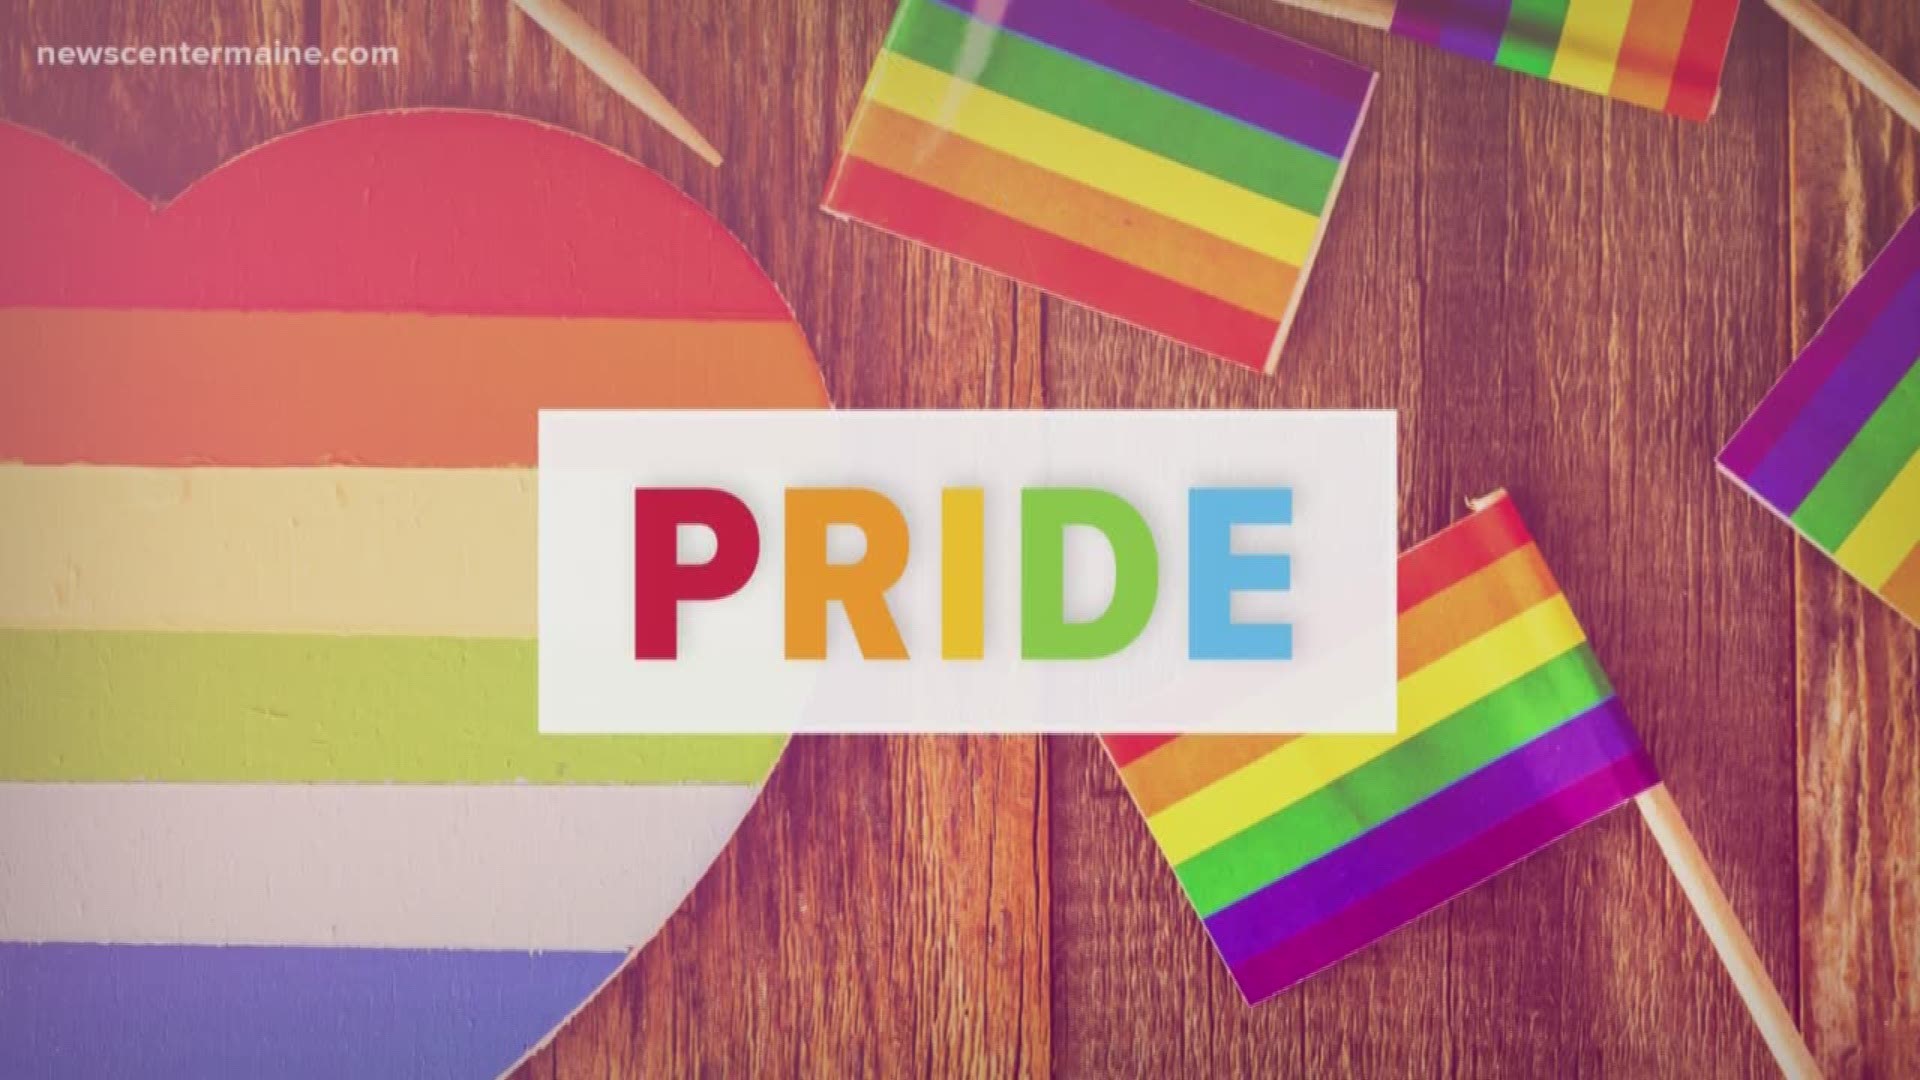 Here's more info on how you can take part in Portland's Pride festivities